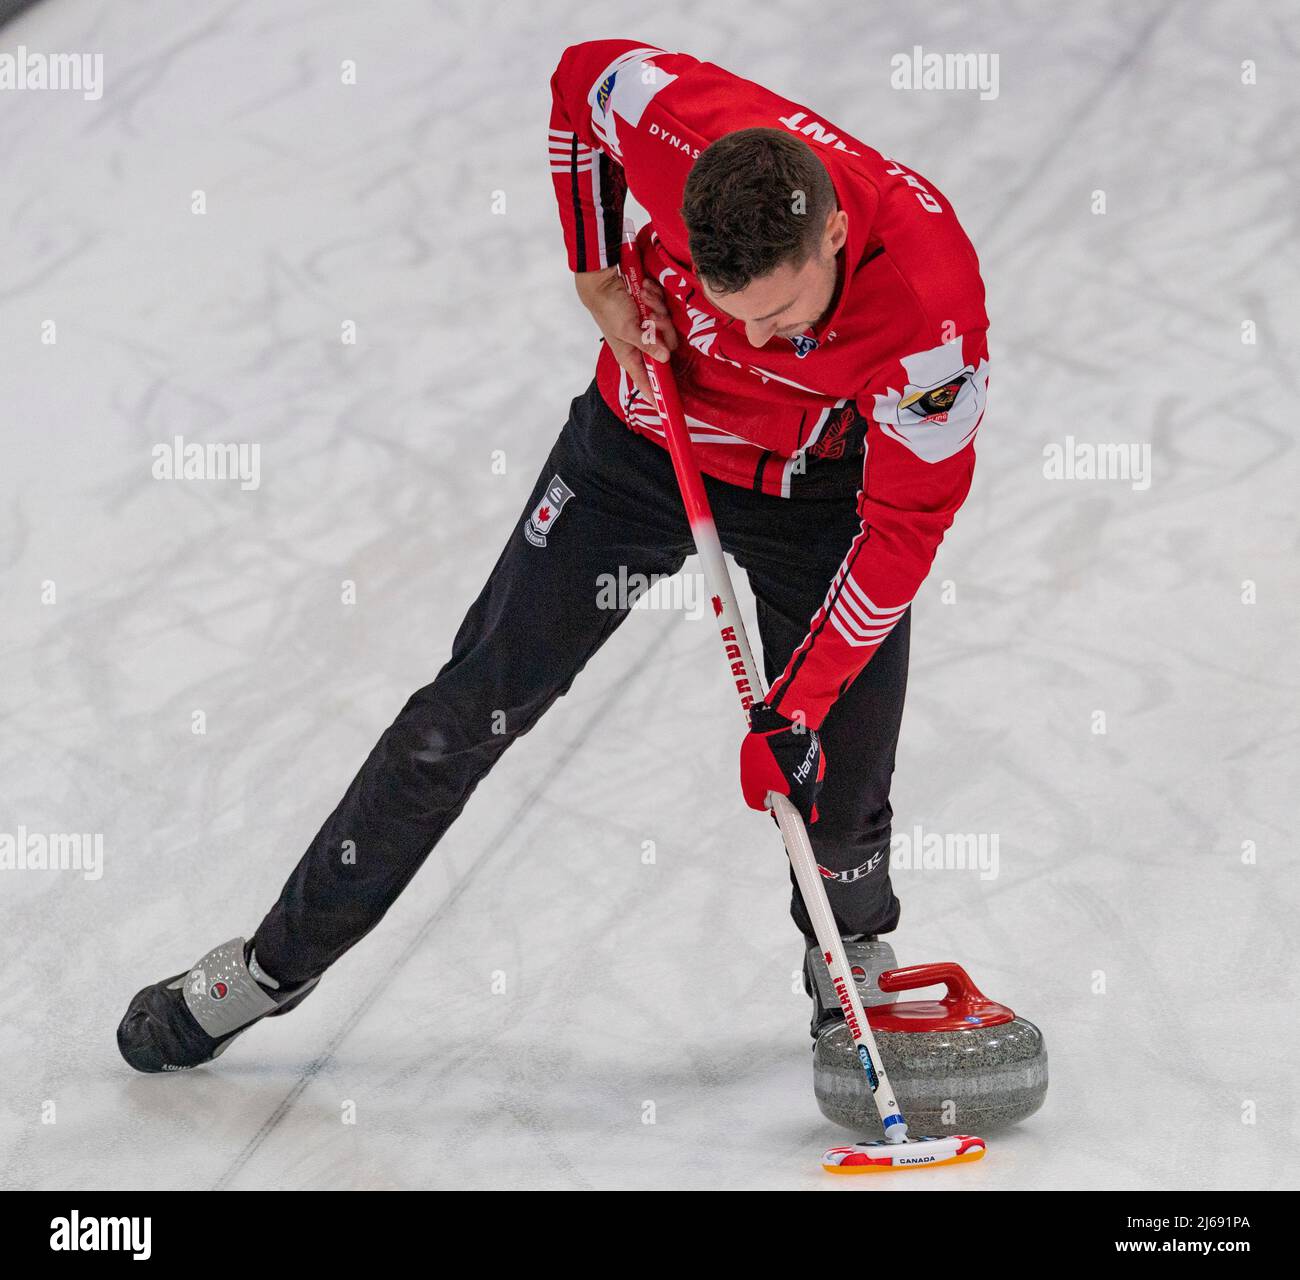 Geneva Switzerland, 29th April 2022 Brett GALLANT of Canada is in action during the World Mixed Doubles Curling Championship 2022